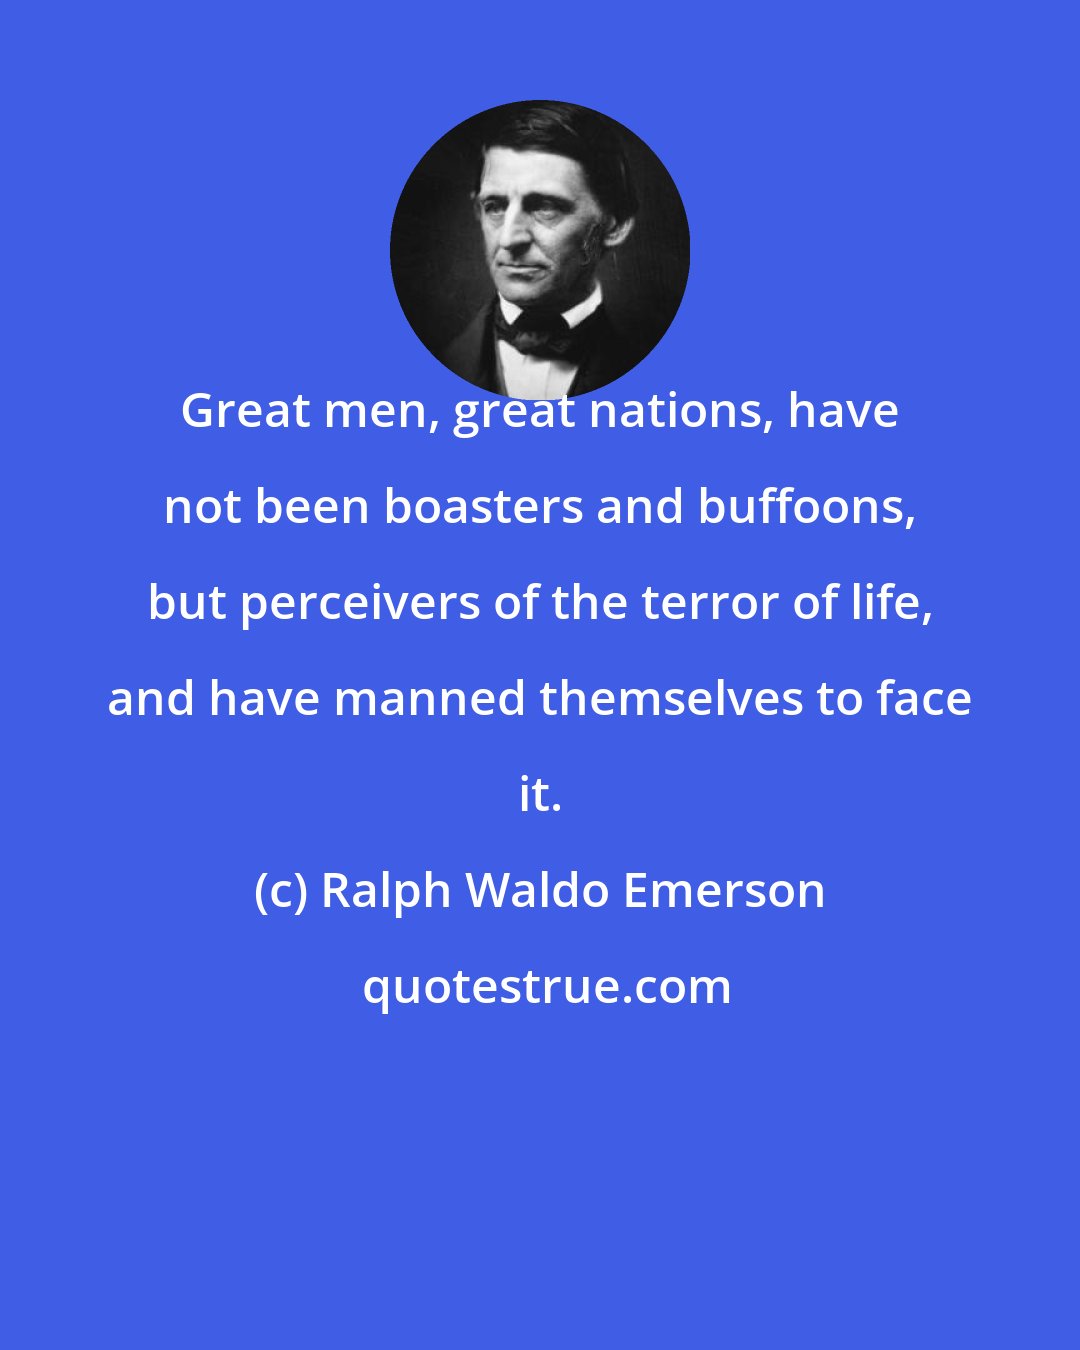 Ralph Waldo Emerson: Great men, great nations, have not been boasters and buffoons, but perceivers of the terror of life, and have manned themselves to face it.